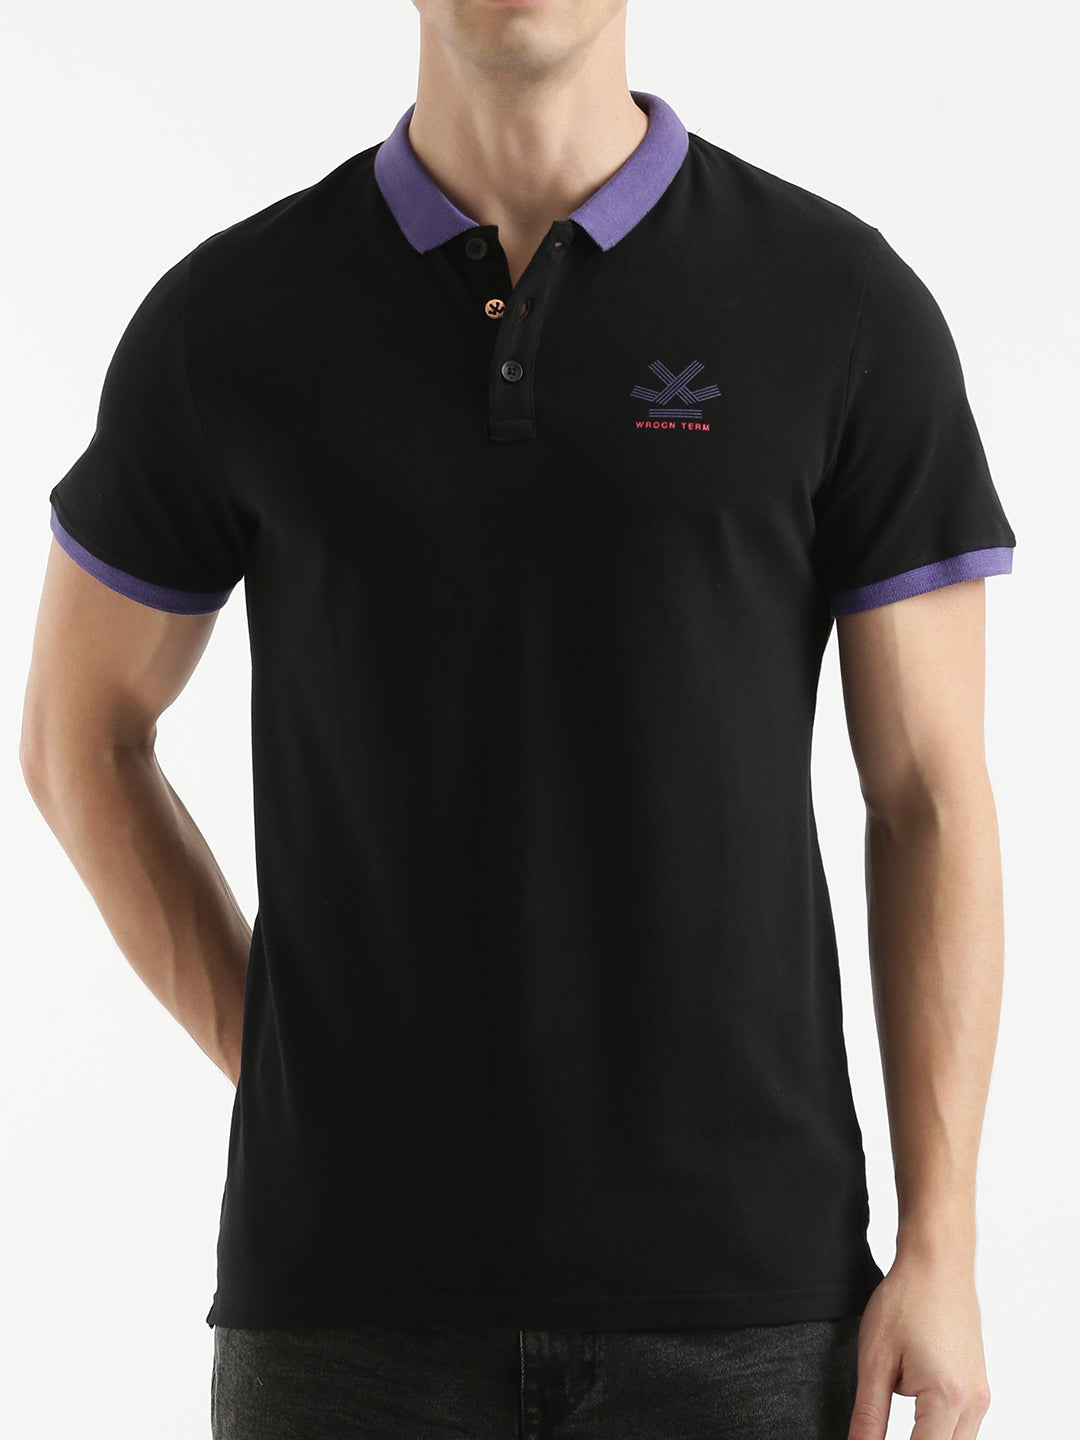 Classic Solid Black Polo T-Shirt